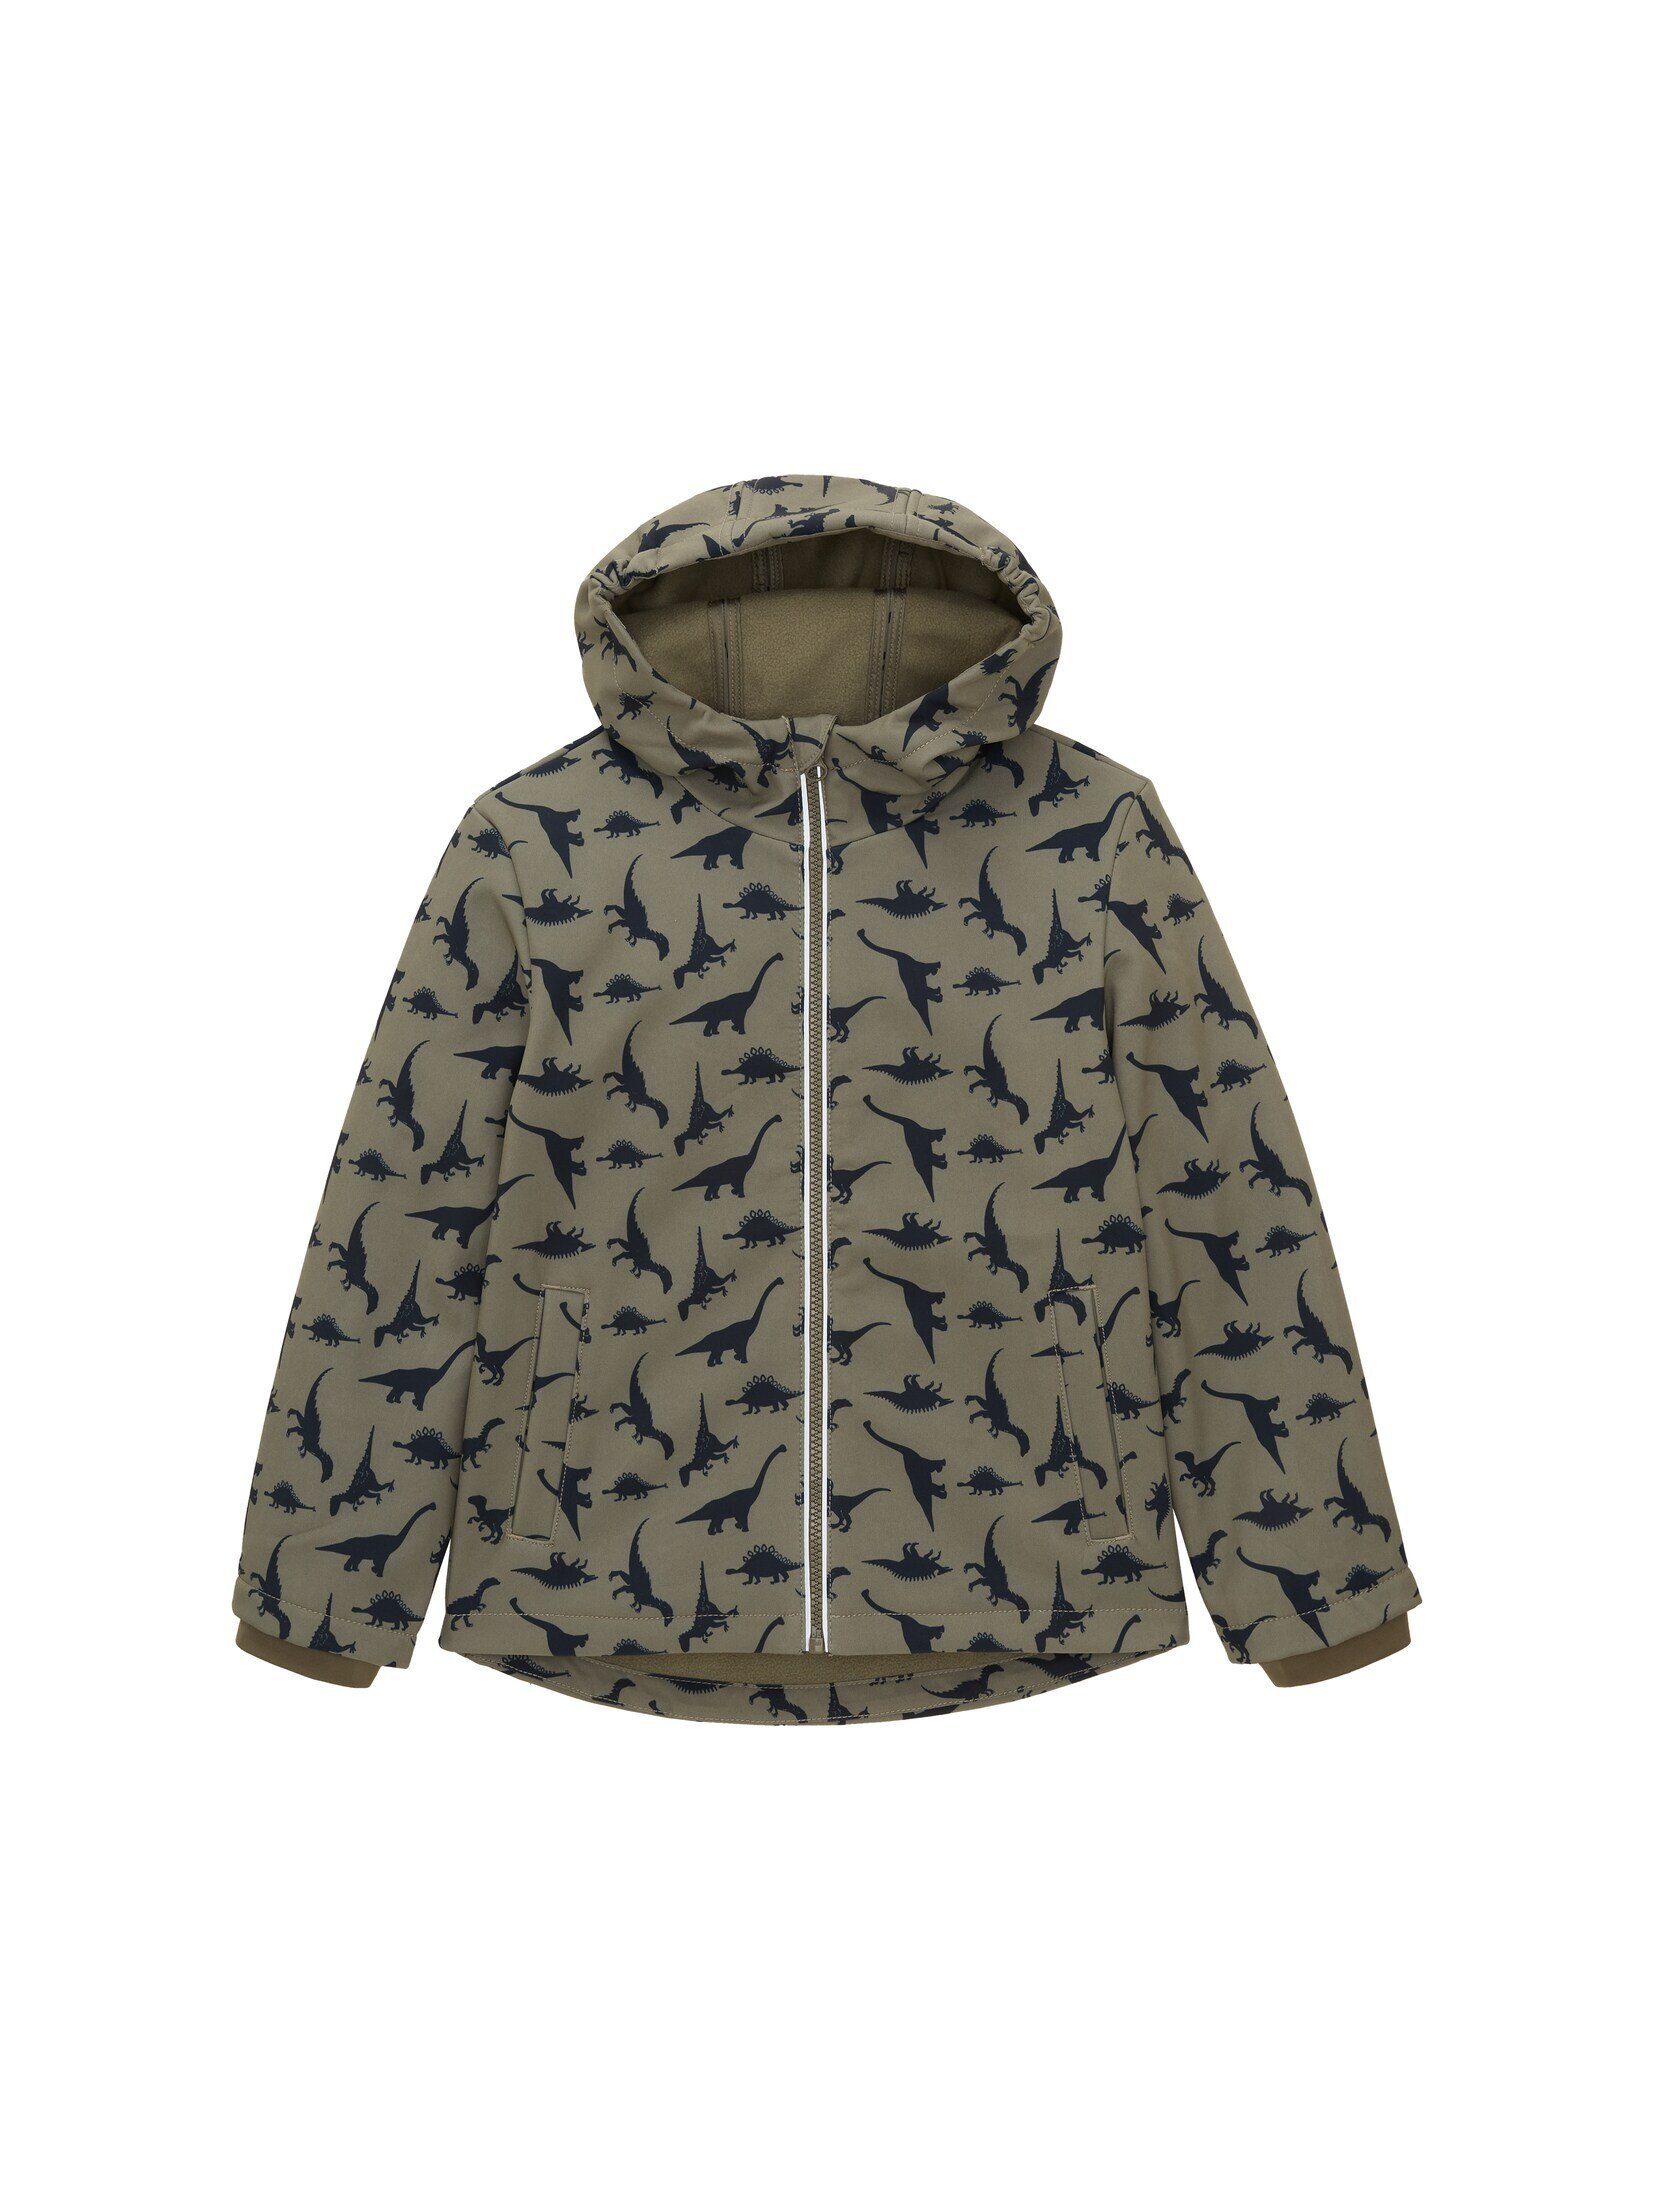 TOM TAILOR Collegejacke Softshell Jacke mit Allover-Print olive dino all over print